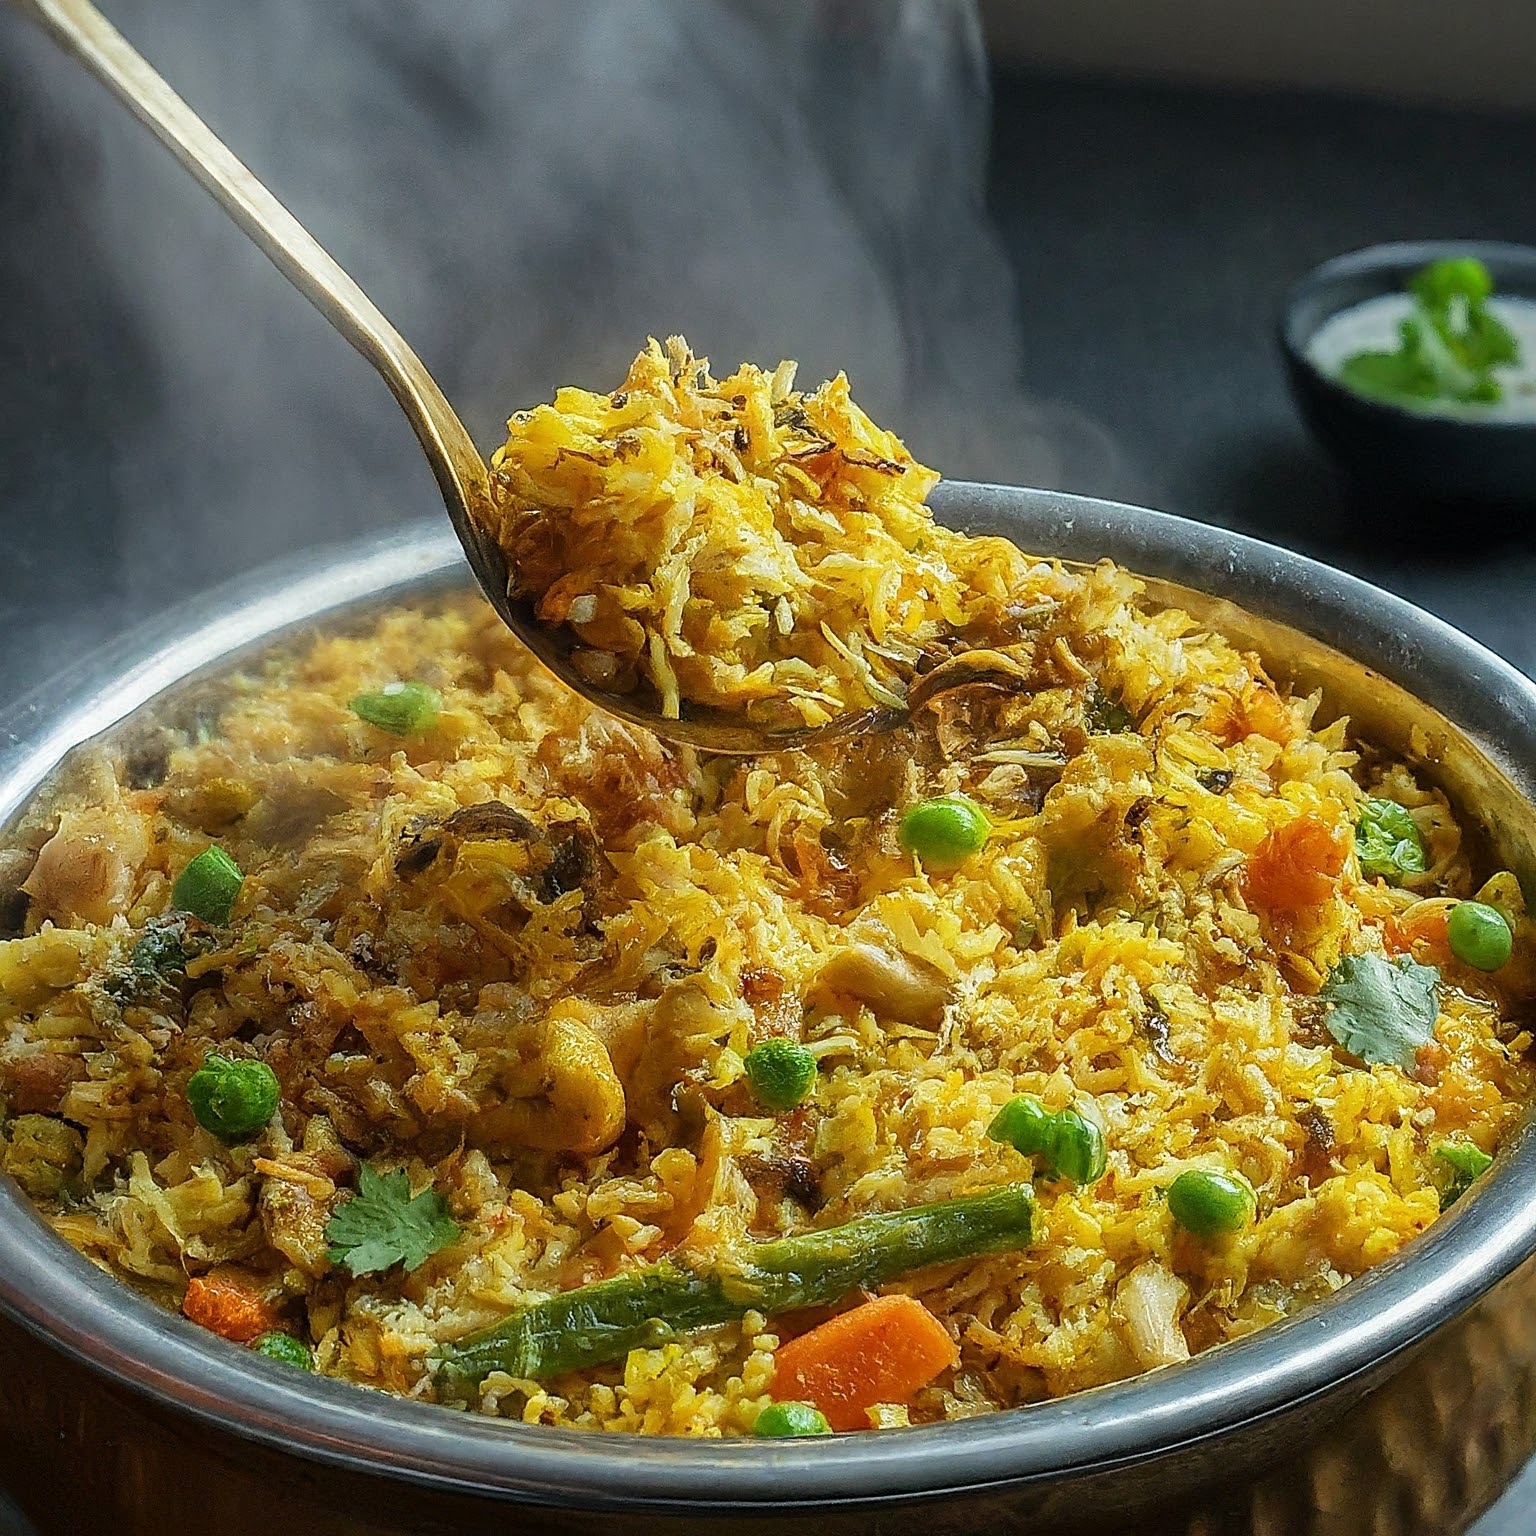 A Hyderabadi Vegetable Biryani with fluffy rice, colourful vegetables, and fragrant spices